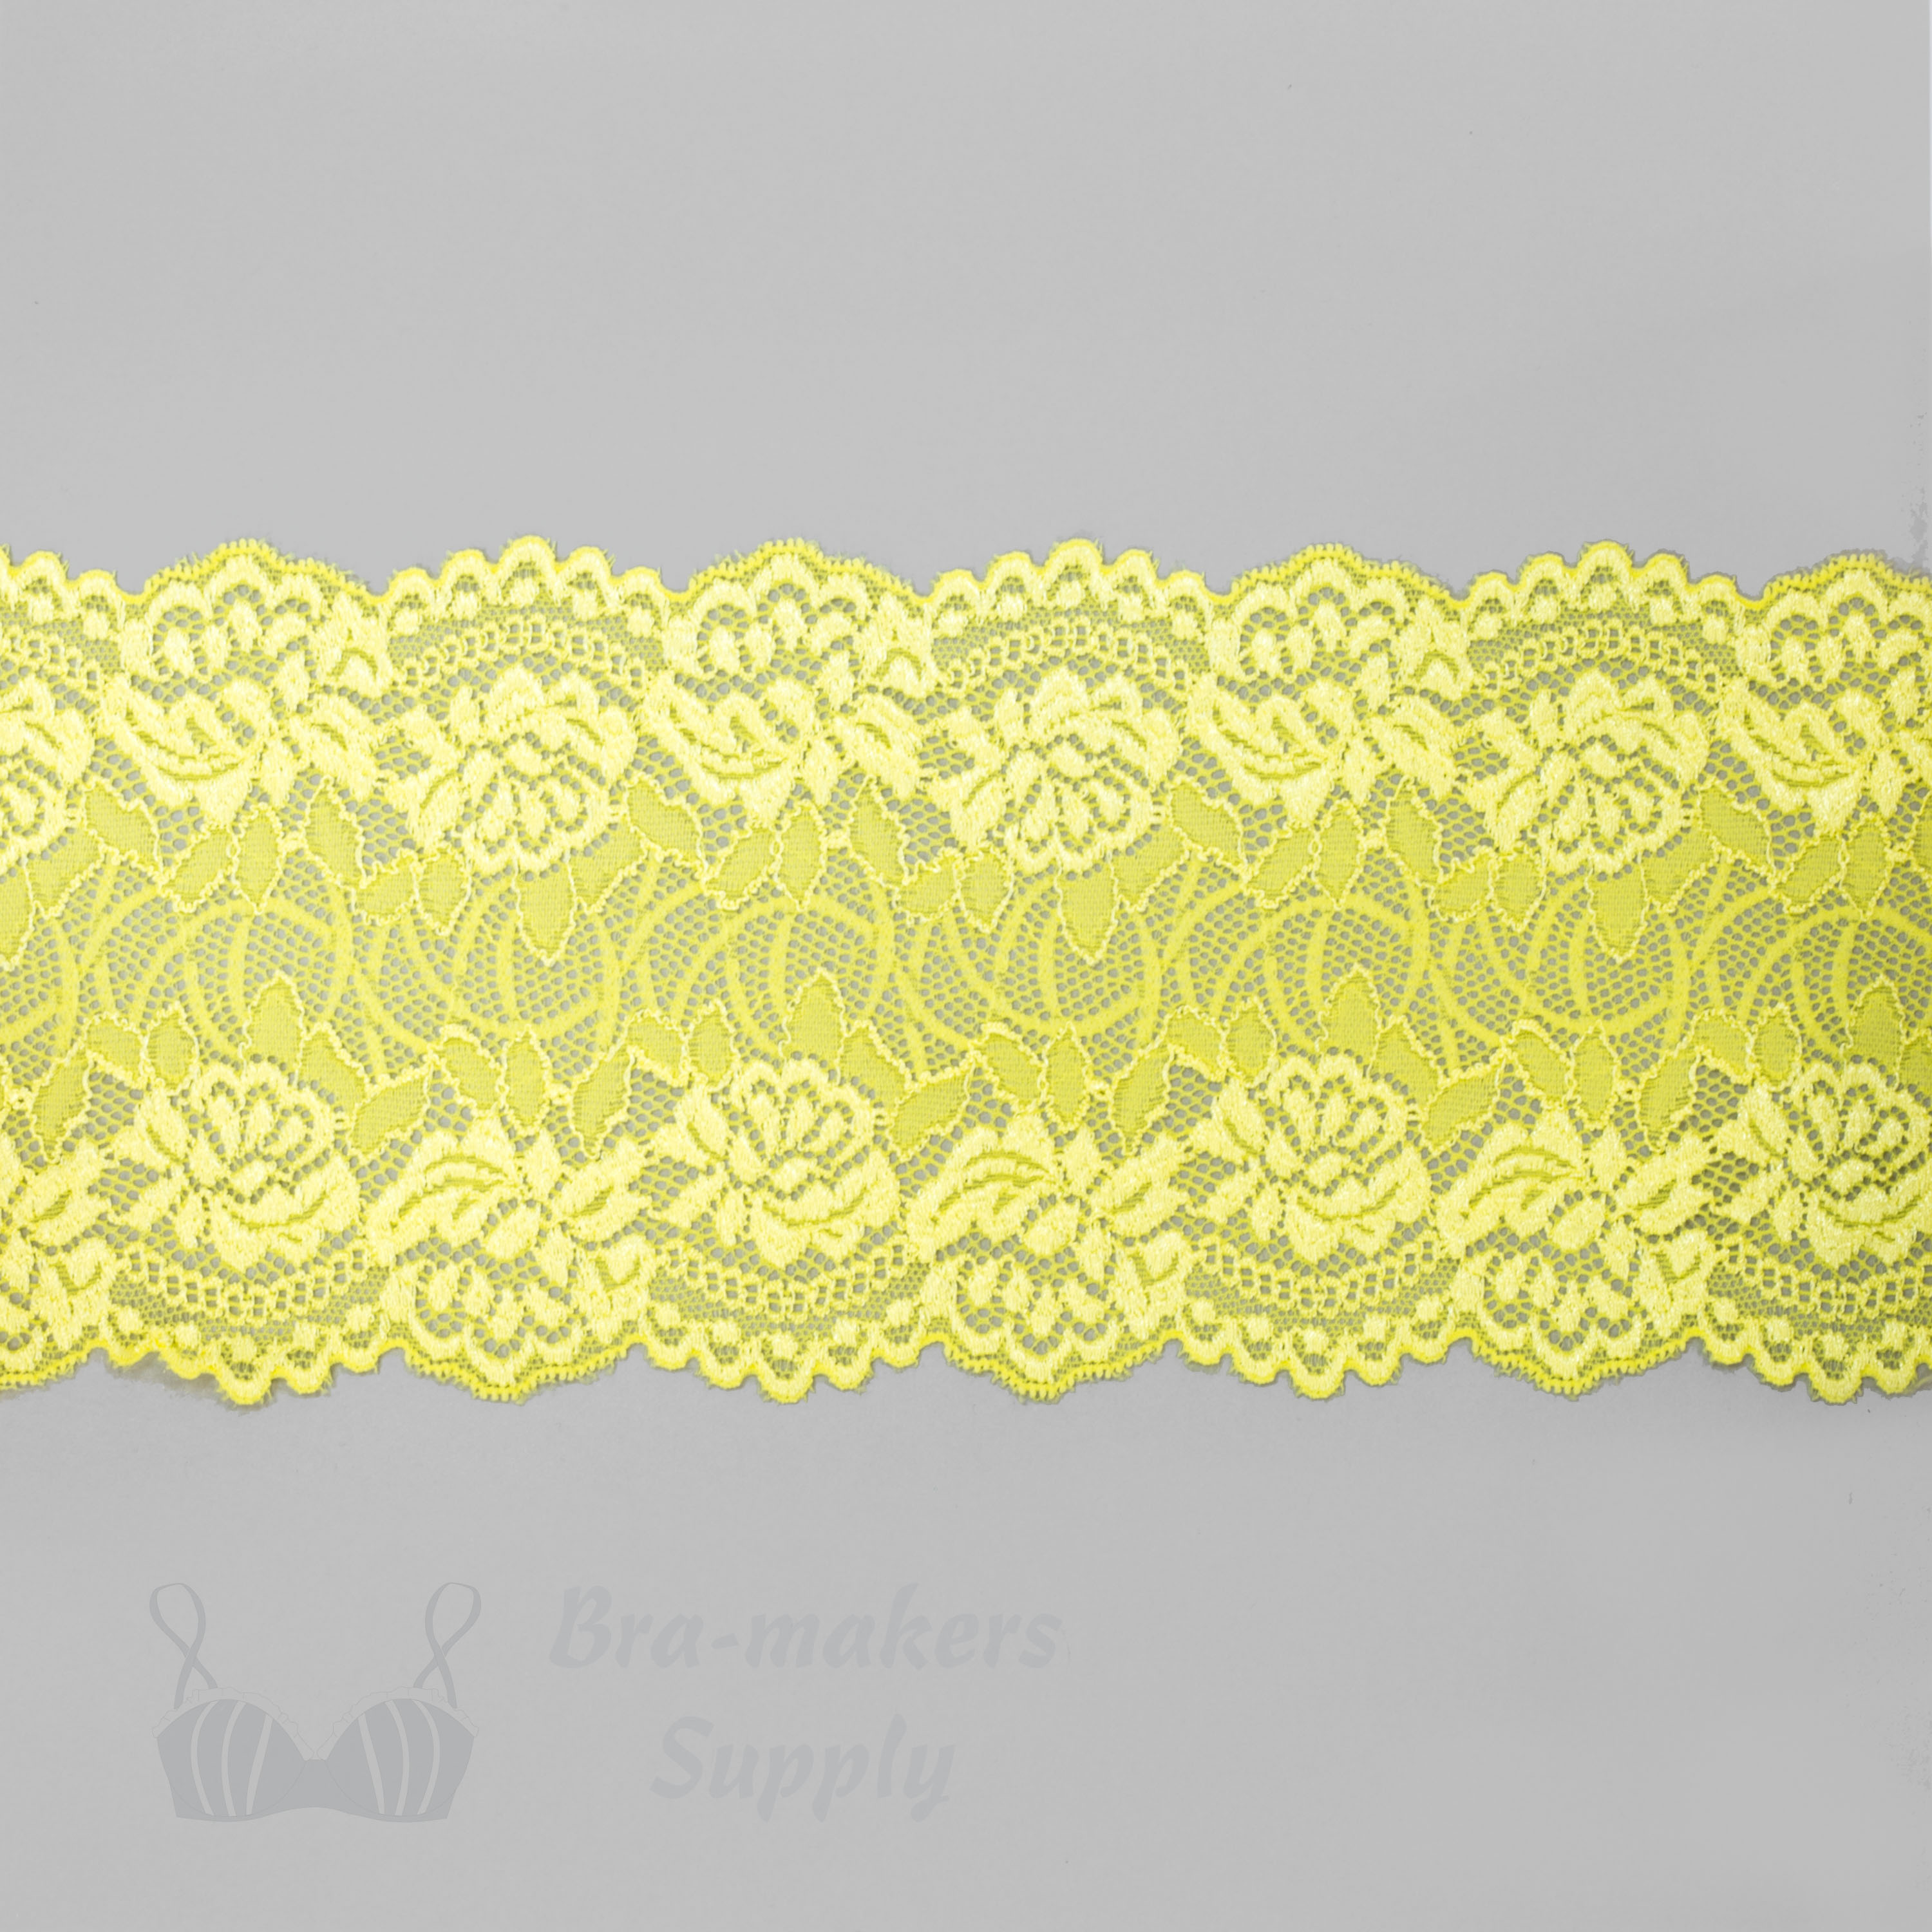 Five Inch Bright Yellow Floral Stretch Lace - Bra-Makers Supply